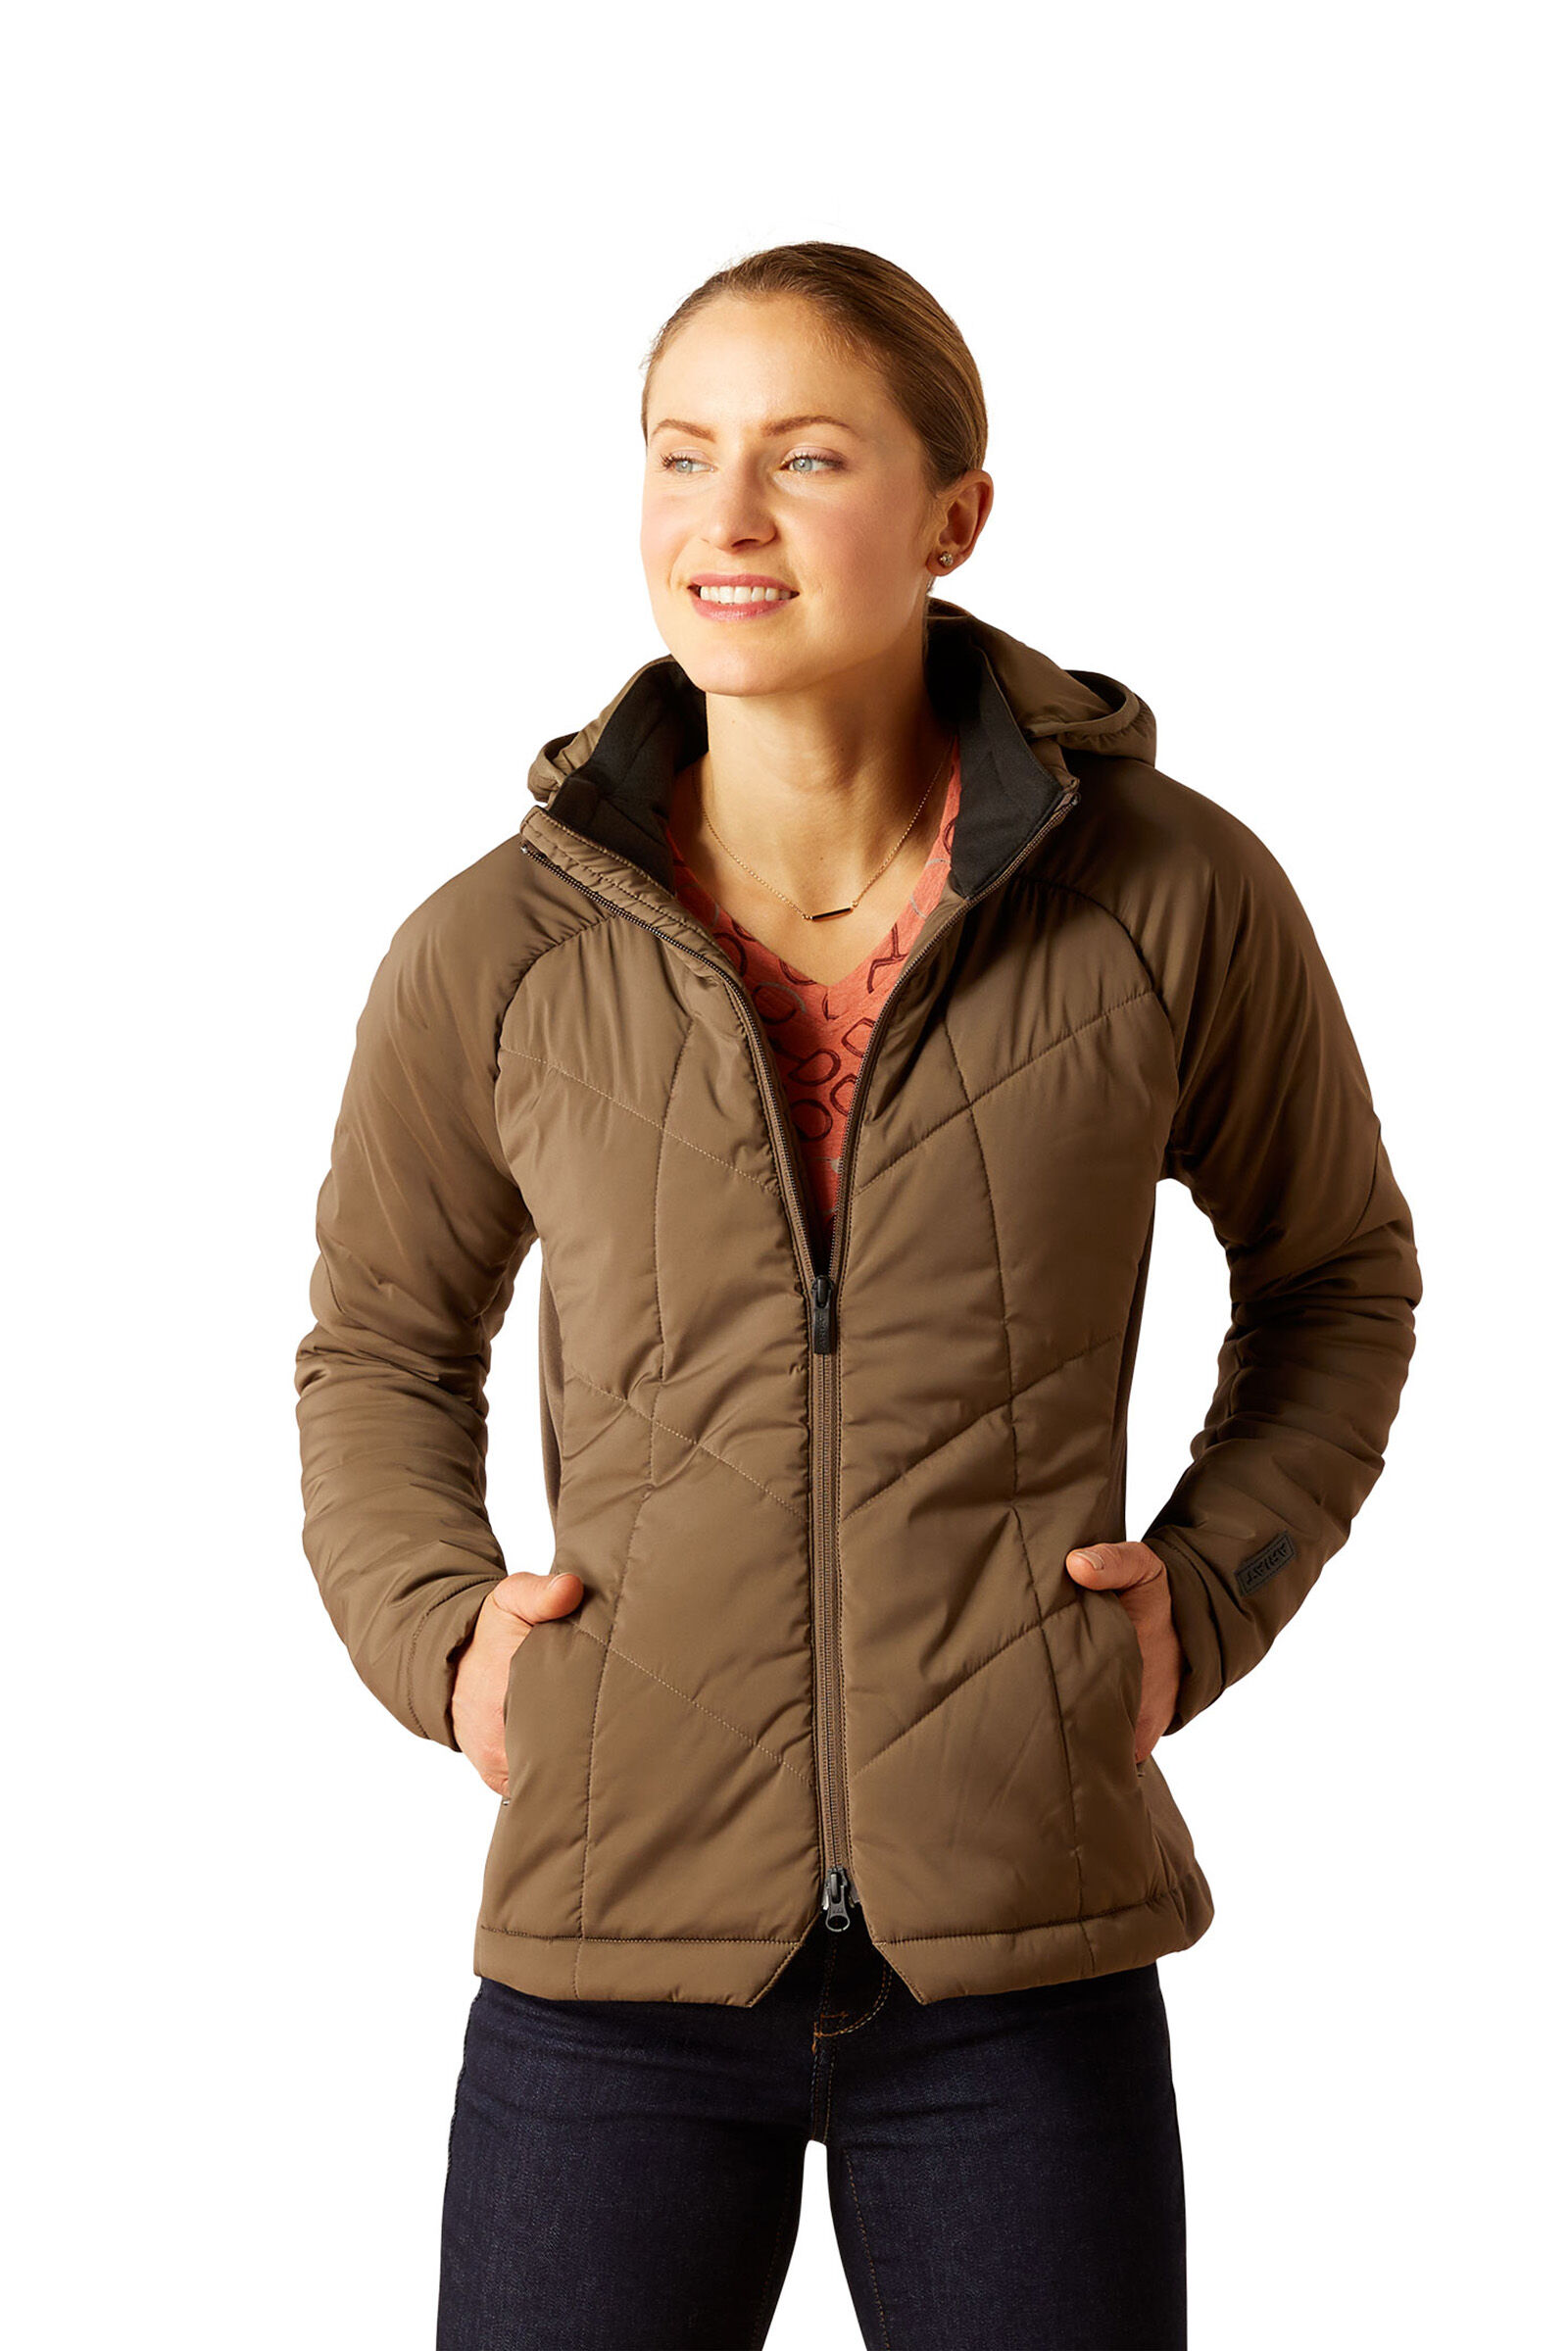 Plum Insulated Jacket - Women's Construction Work Clothes